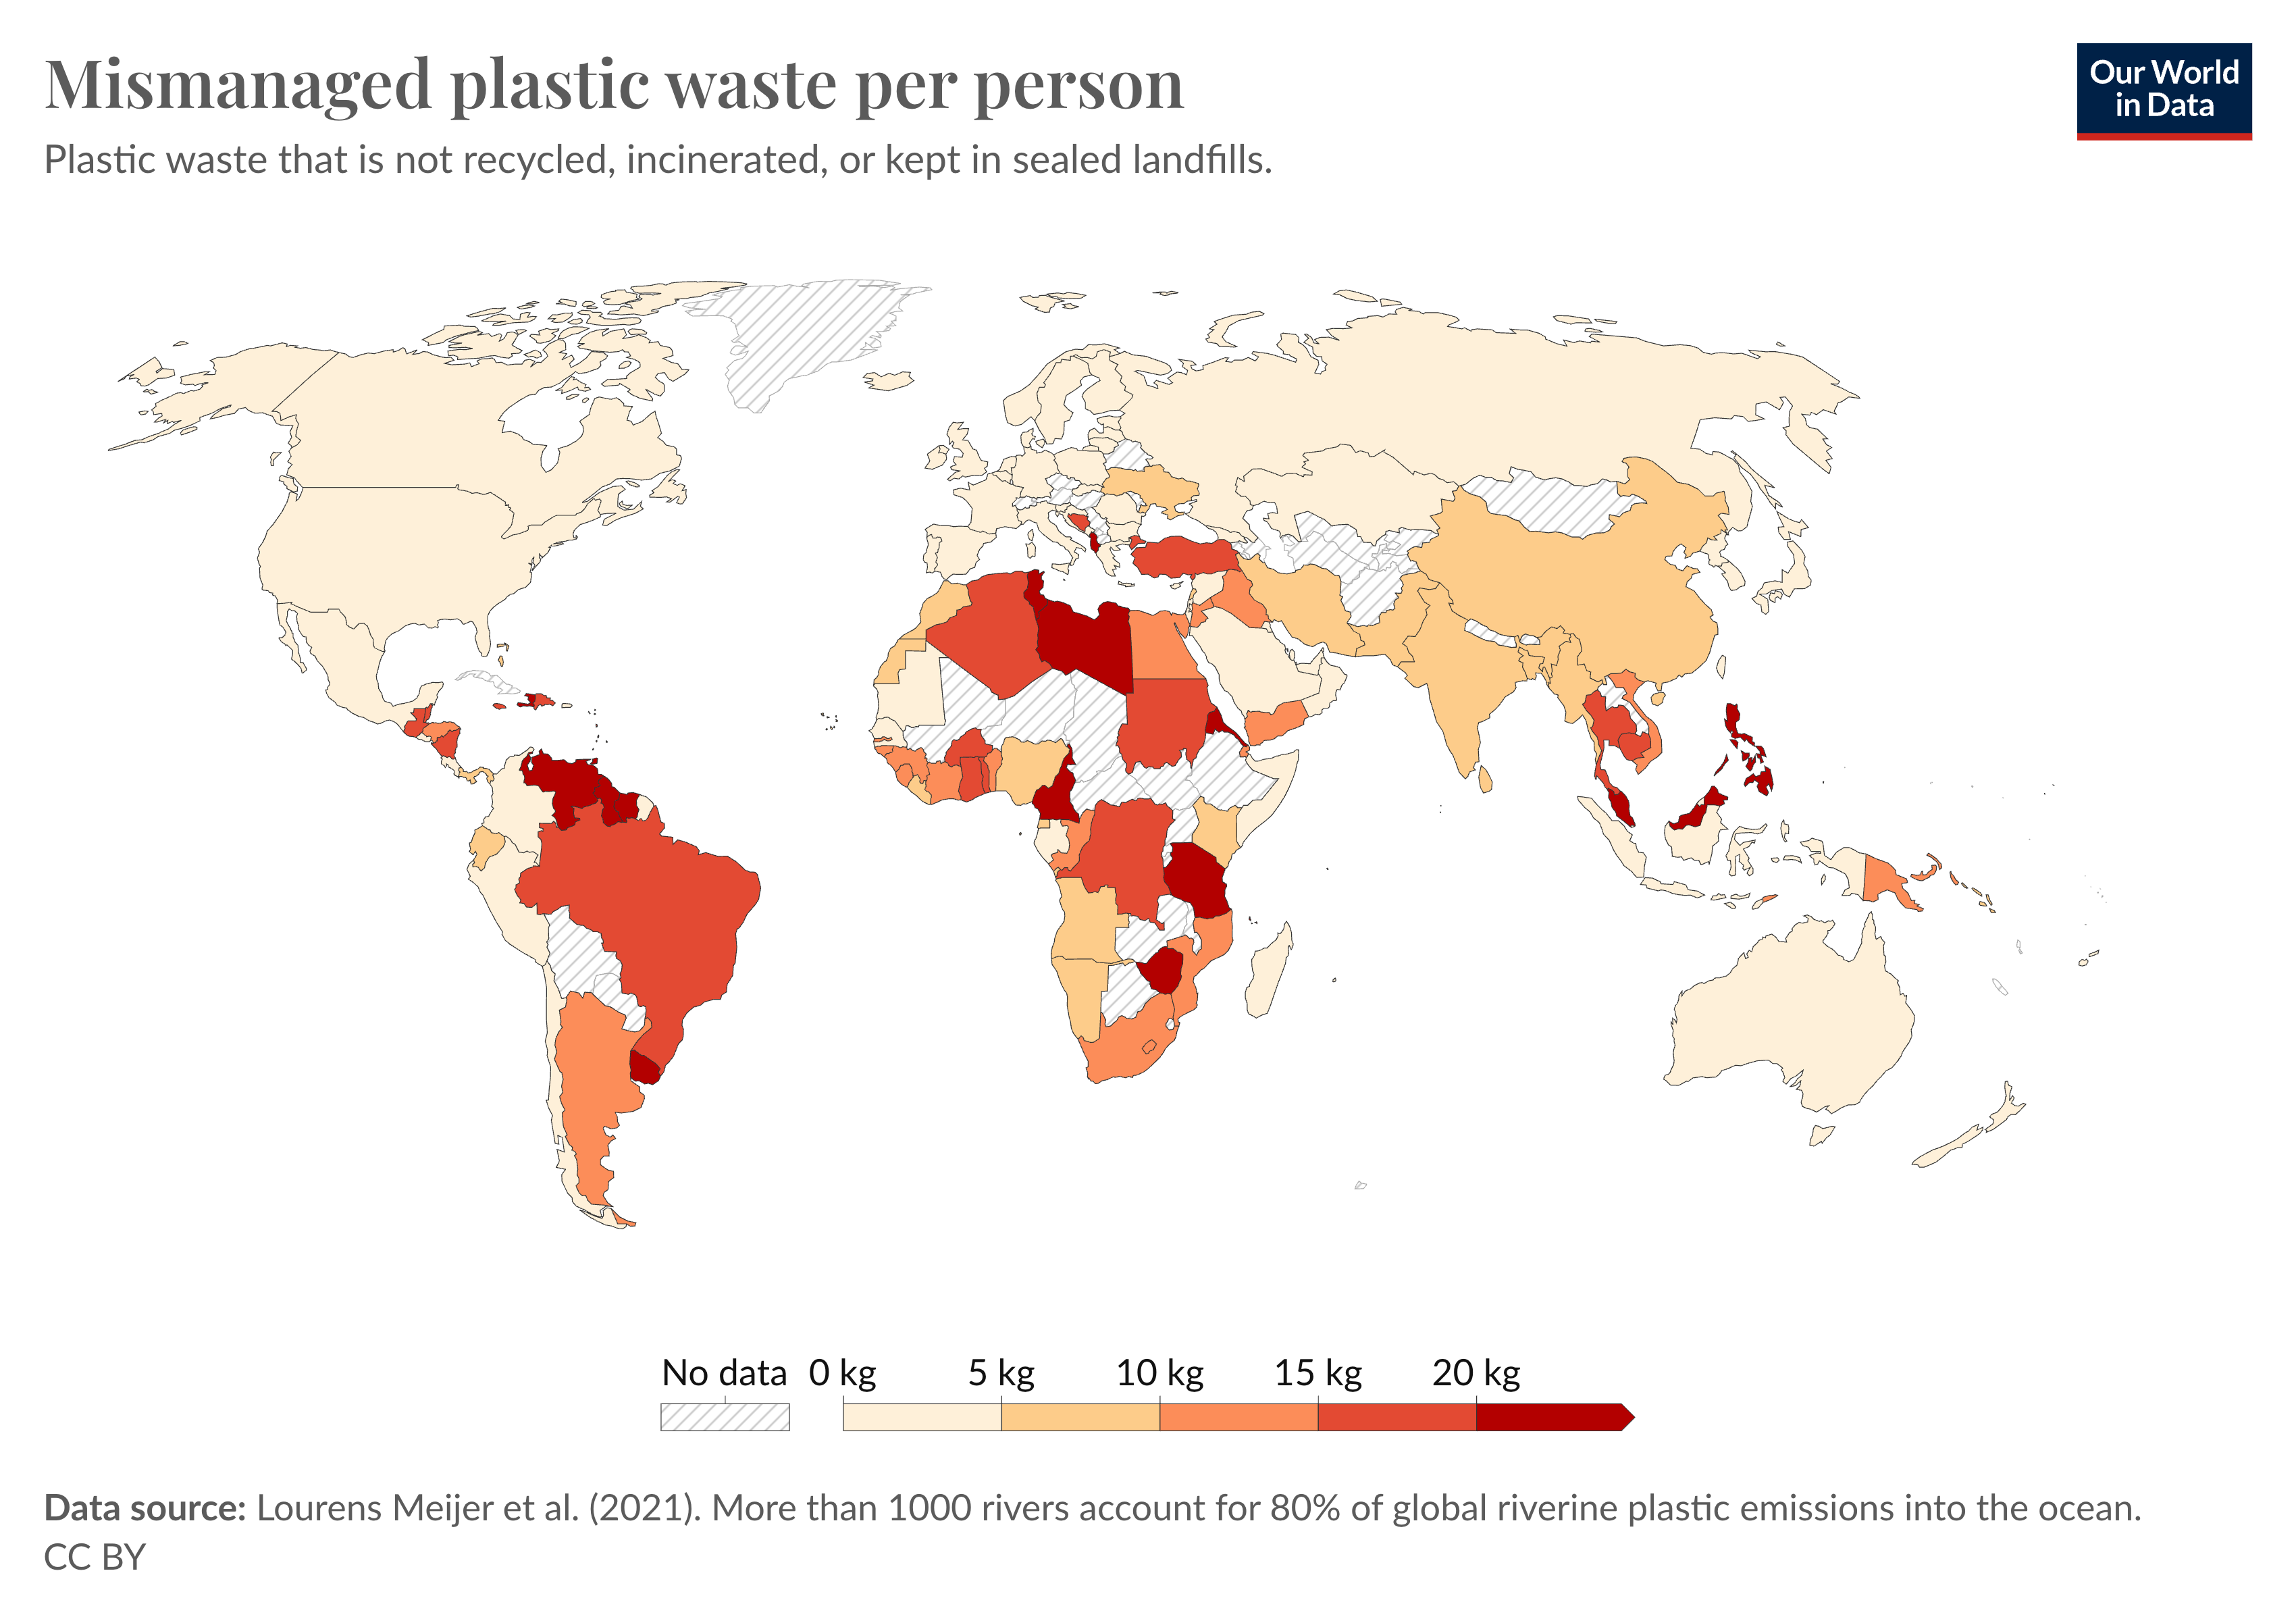 Global map showing mismanaged plastic waste per person. This tends to be higher in low and middle-income countries.